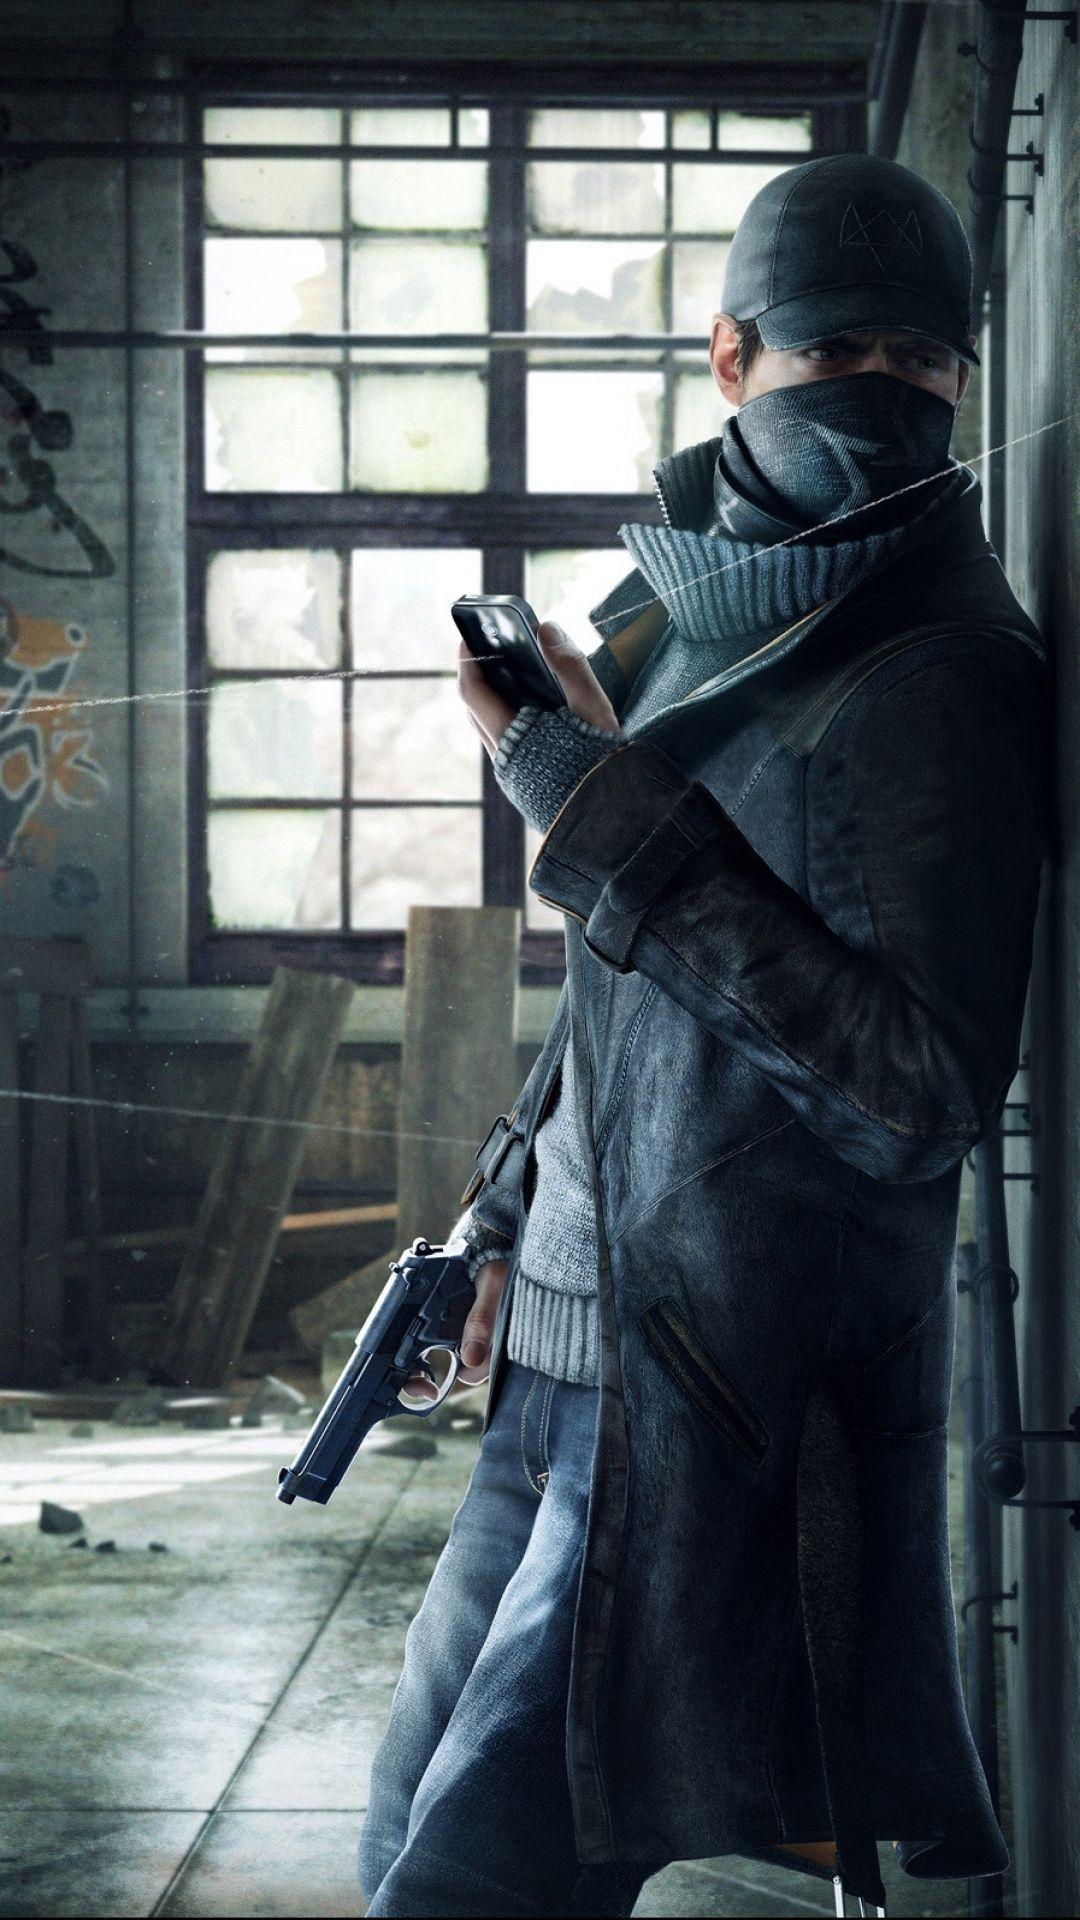 Watch Dogs HD Android Wallpapers - Wallpaper Cave